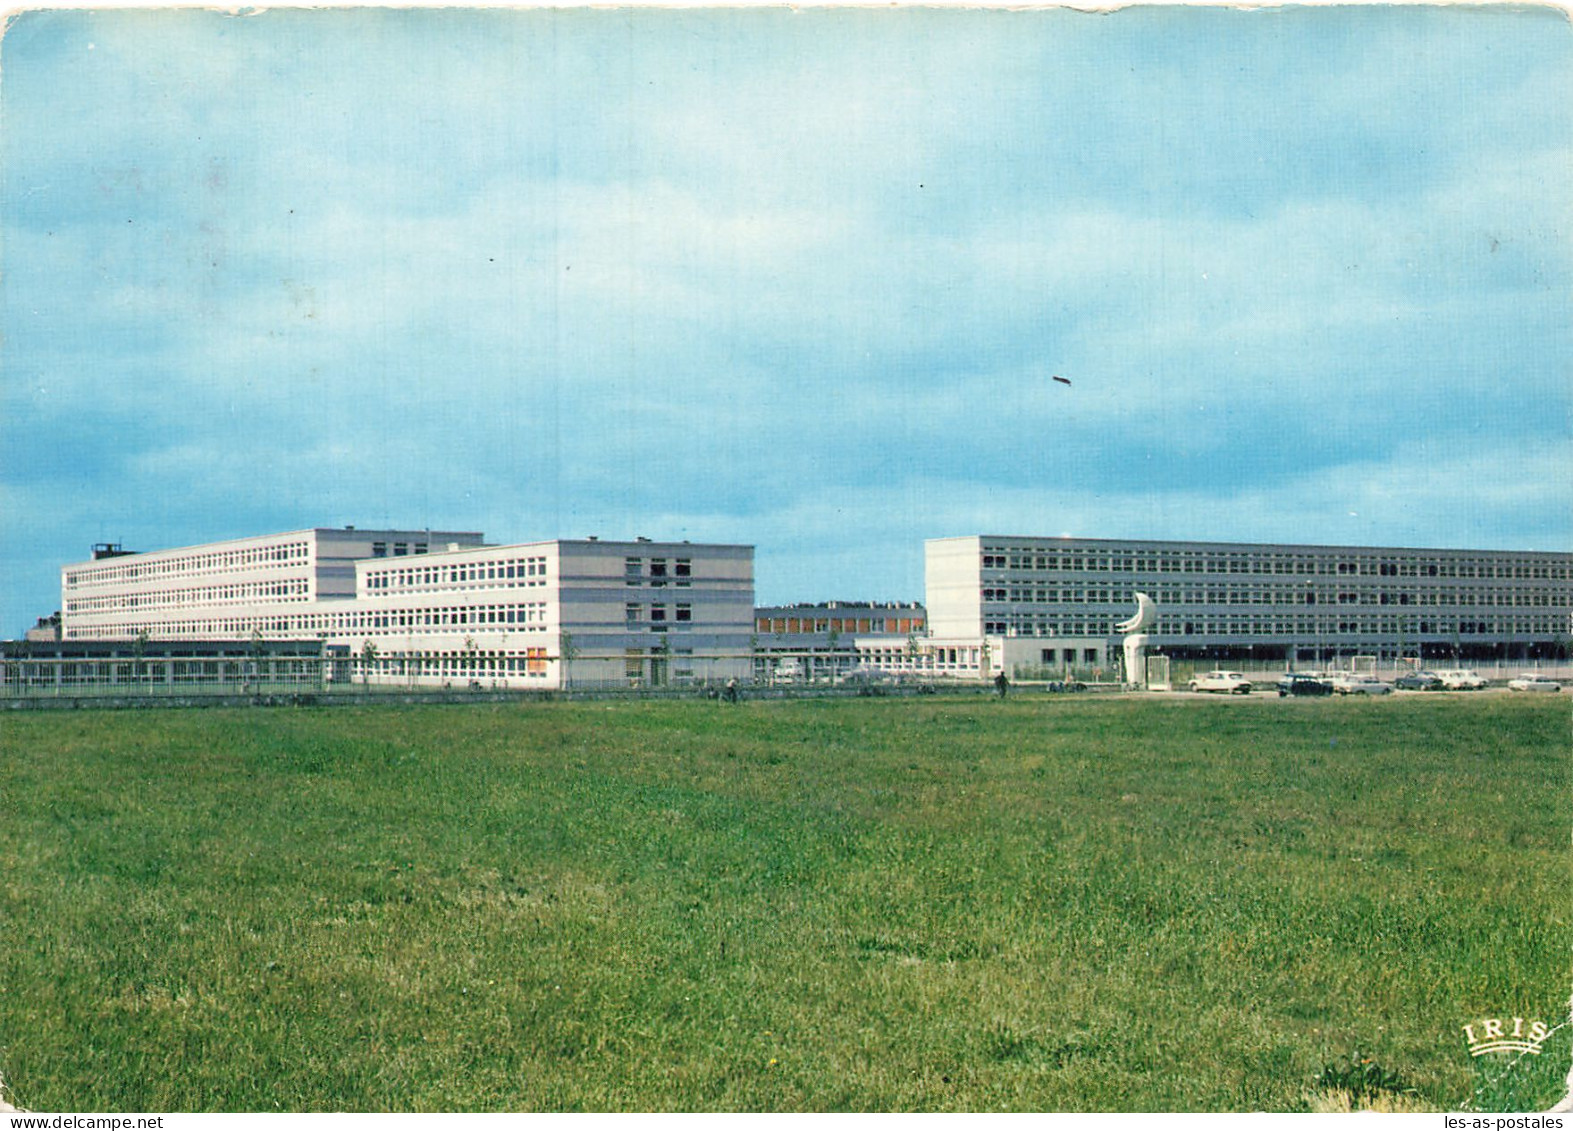 79  THOUARS LE LYCEE TECHNIQUE - Thouars